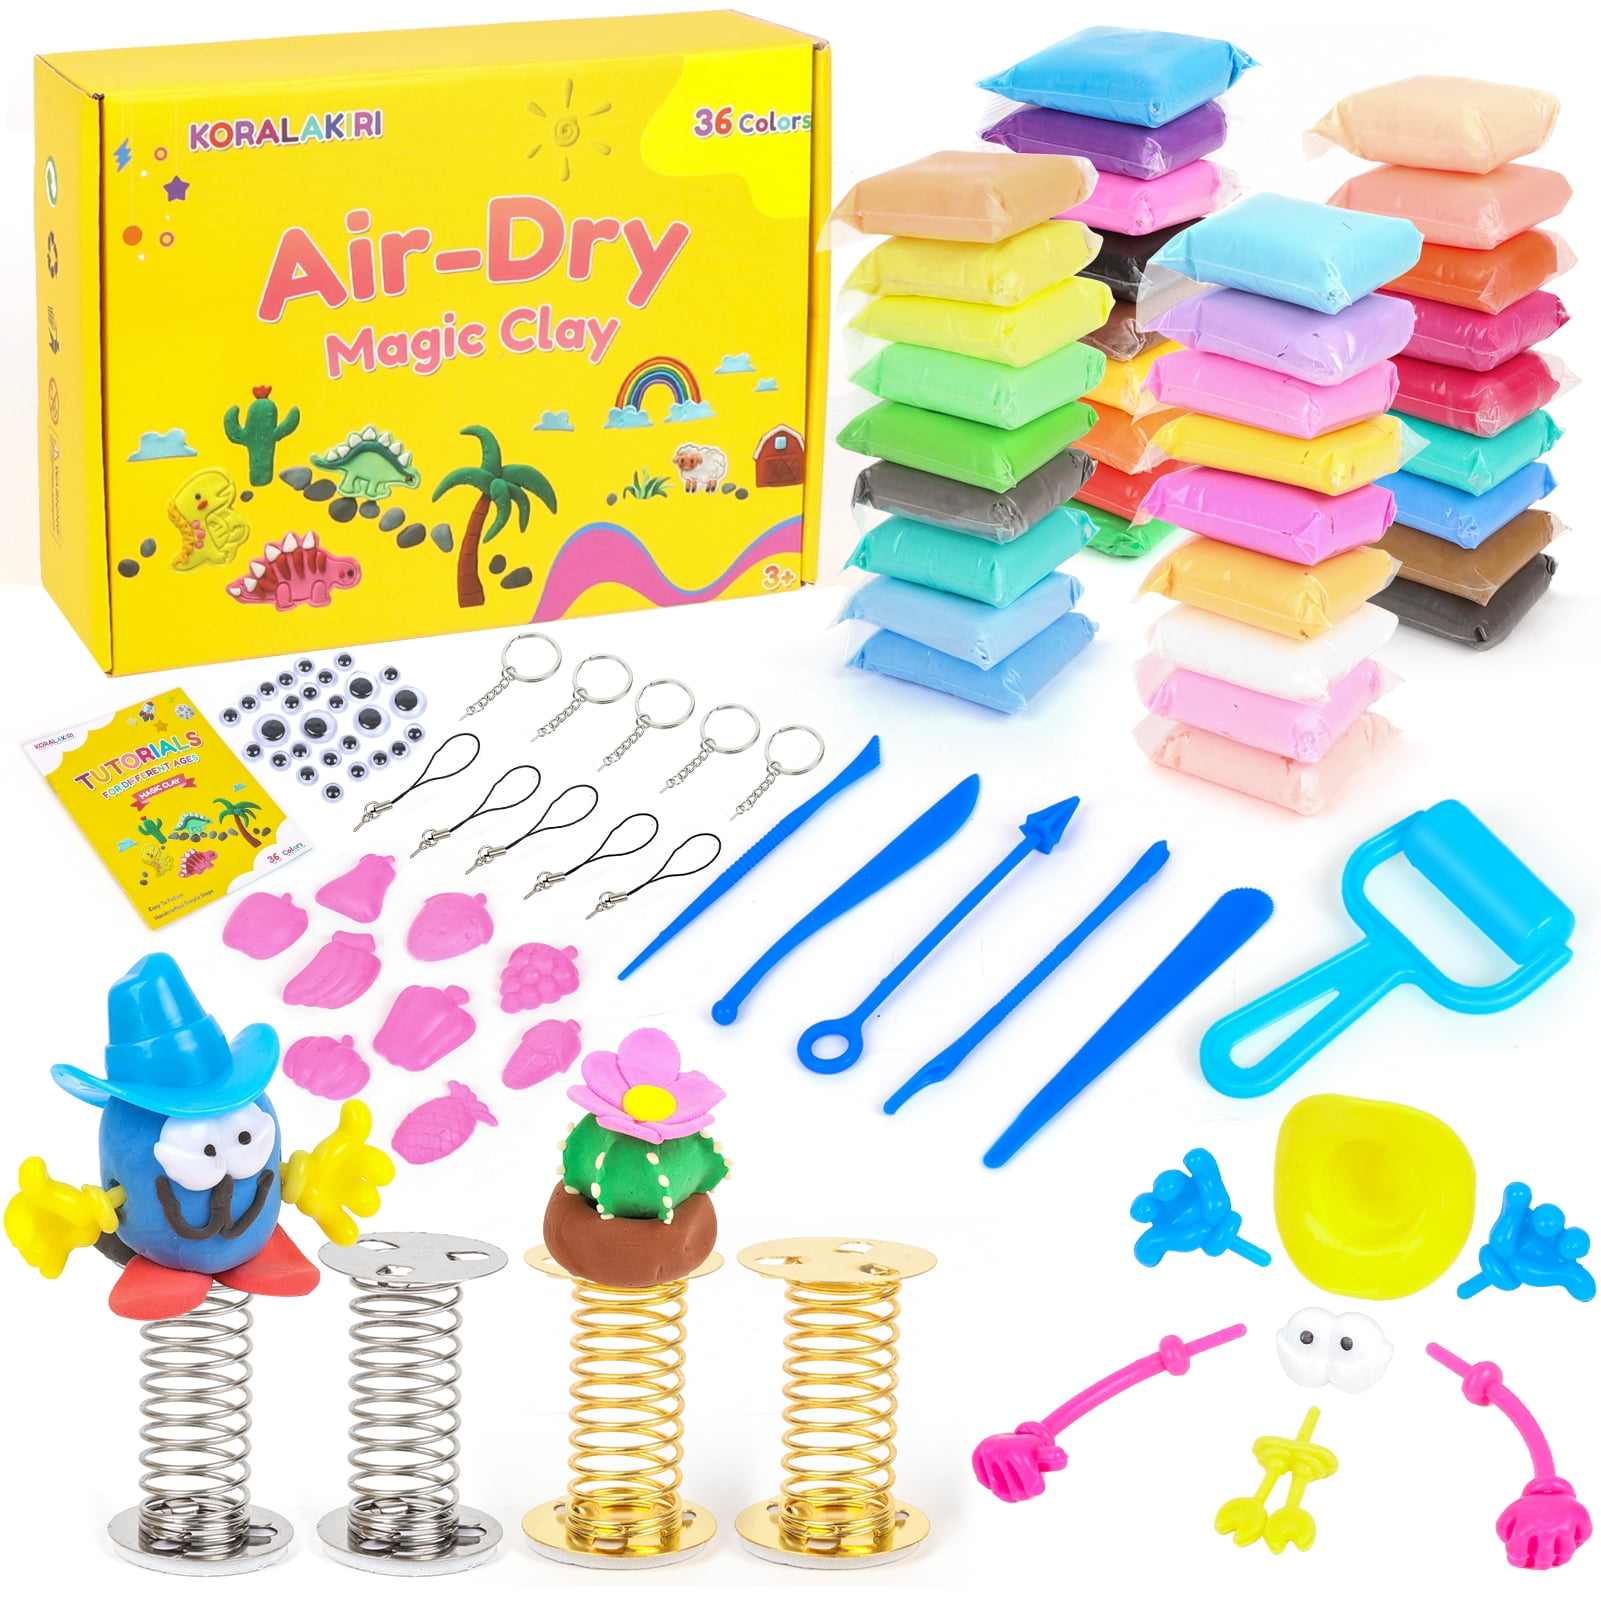 Original Stationery Mini Sweets & Desserts Air Dry Clay Kit, 10 Vibrant  Colors of Air Dry Clay for Kids and Over 30 Pieces in This DIY kit to Make  Miniature Clay Food